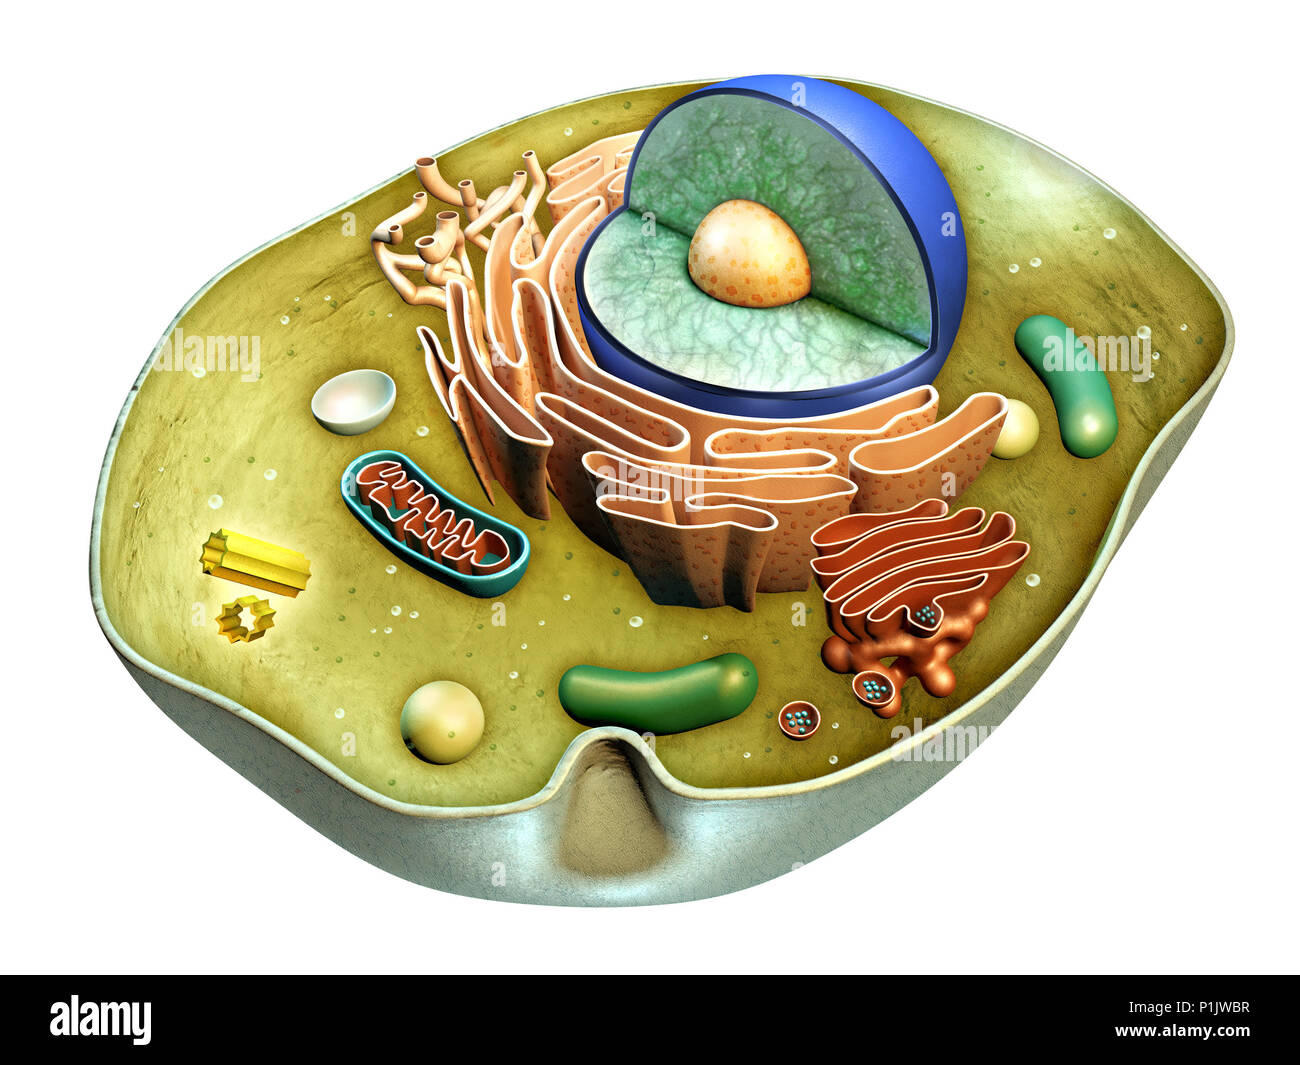 Internal structure of an animal cell. Digital illustration. Clipping path included. Stock Photo